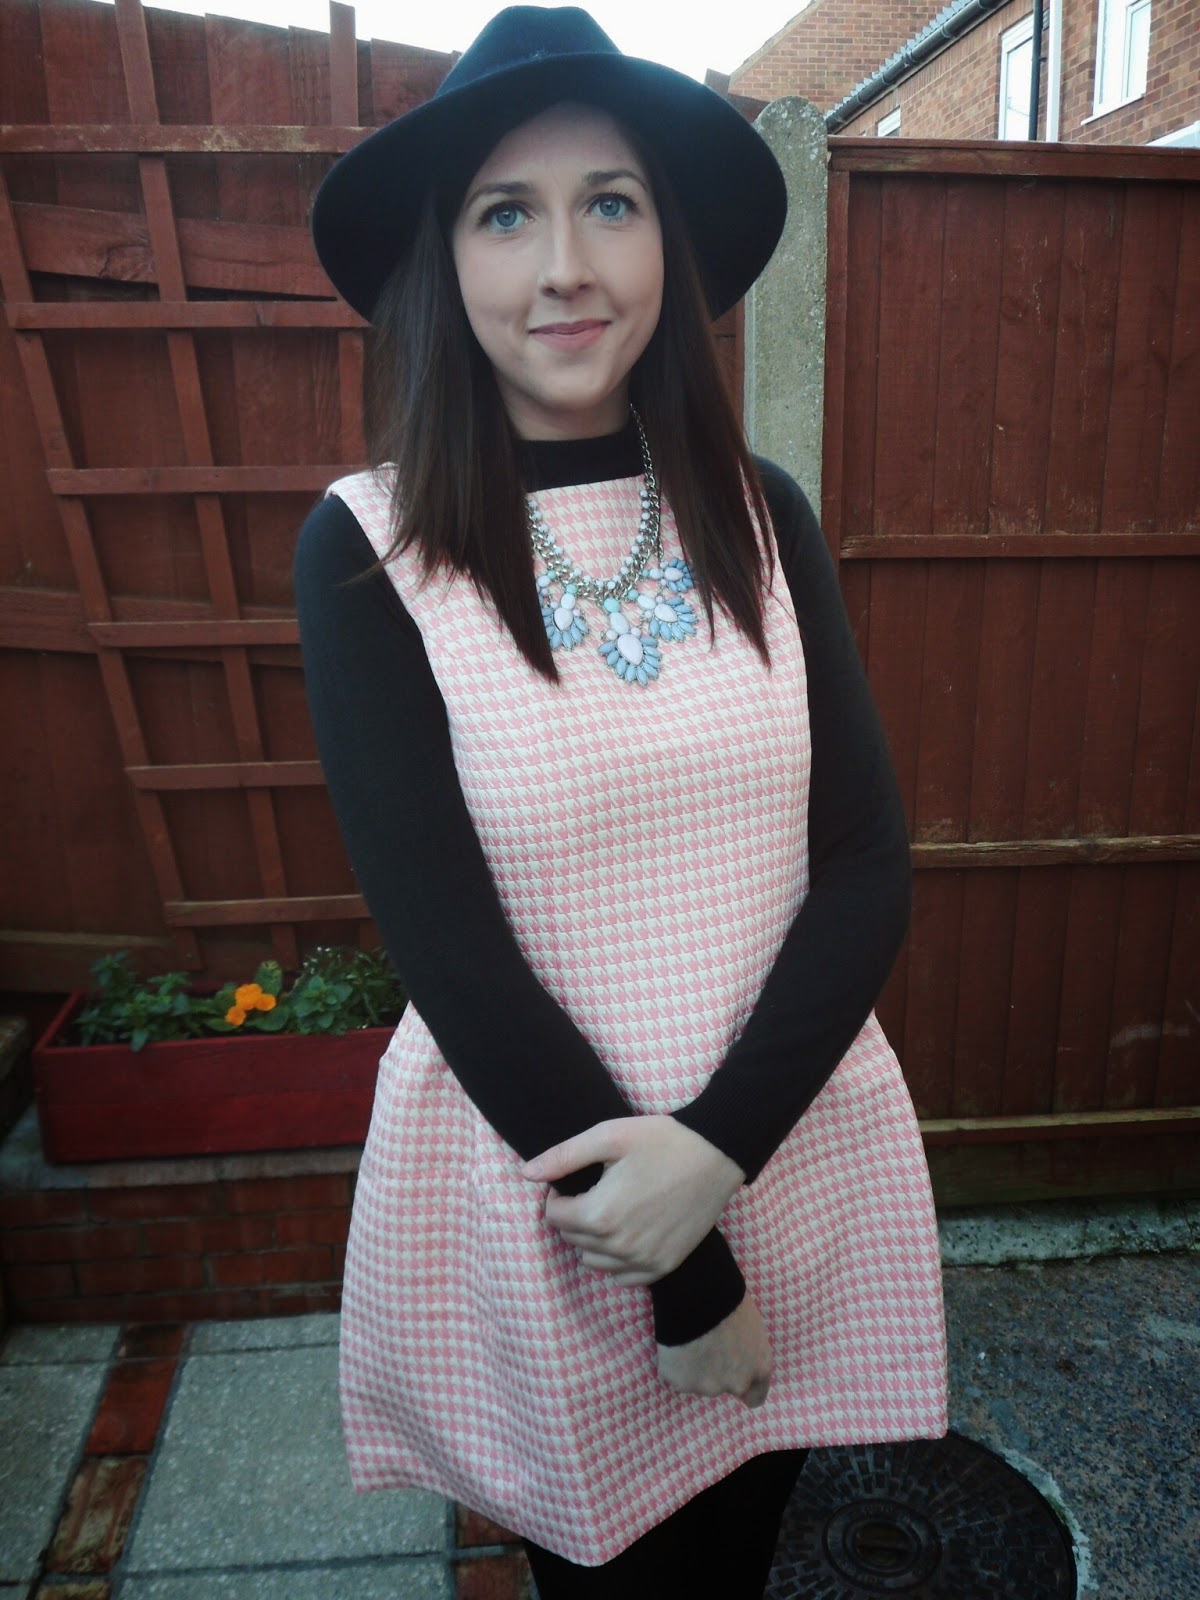 asseenonme, primark, fuschiawhite, asos, wiw, whatimwearing, whatibought, ootd, outfitoftheday, lotd, lookoftheday, fashion, fbloggers, fblogger, fahionblogger, newlook, rollneck, winterfashion, gingham